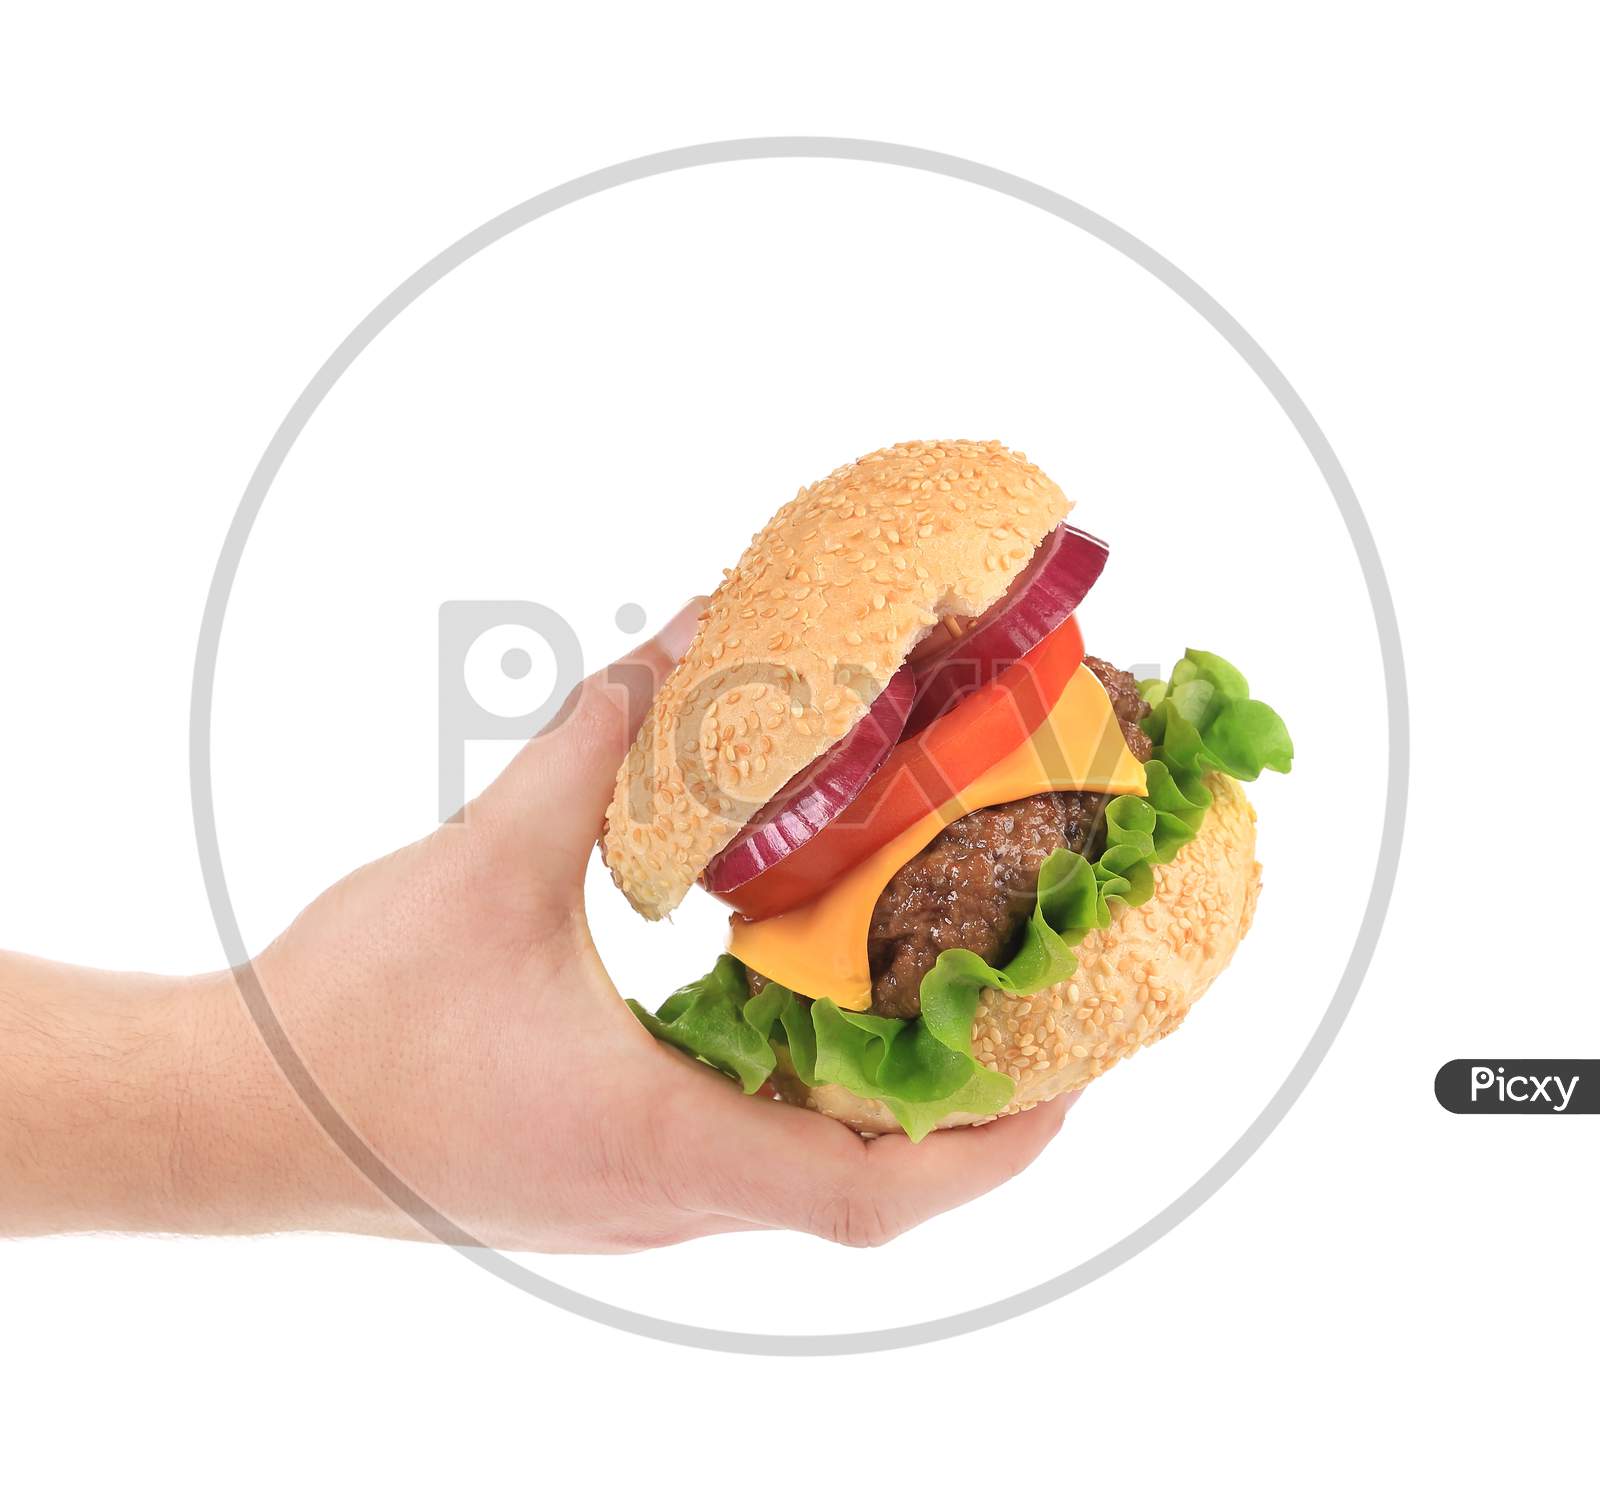 Big Tasty Hamburger In Hand. Isolated On A White Background.